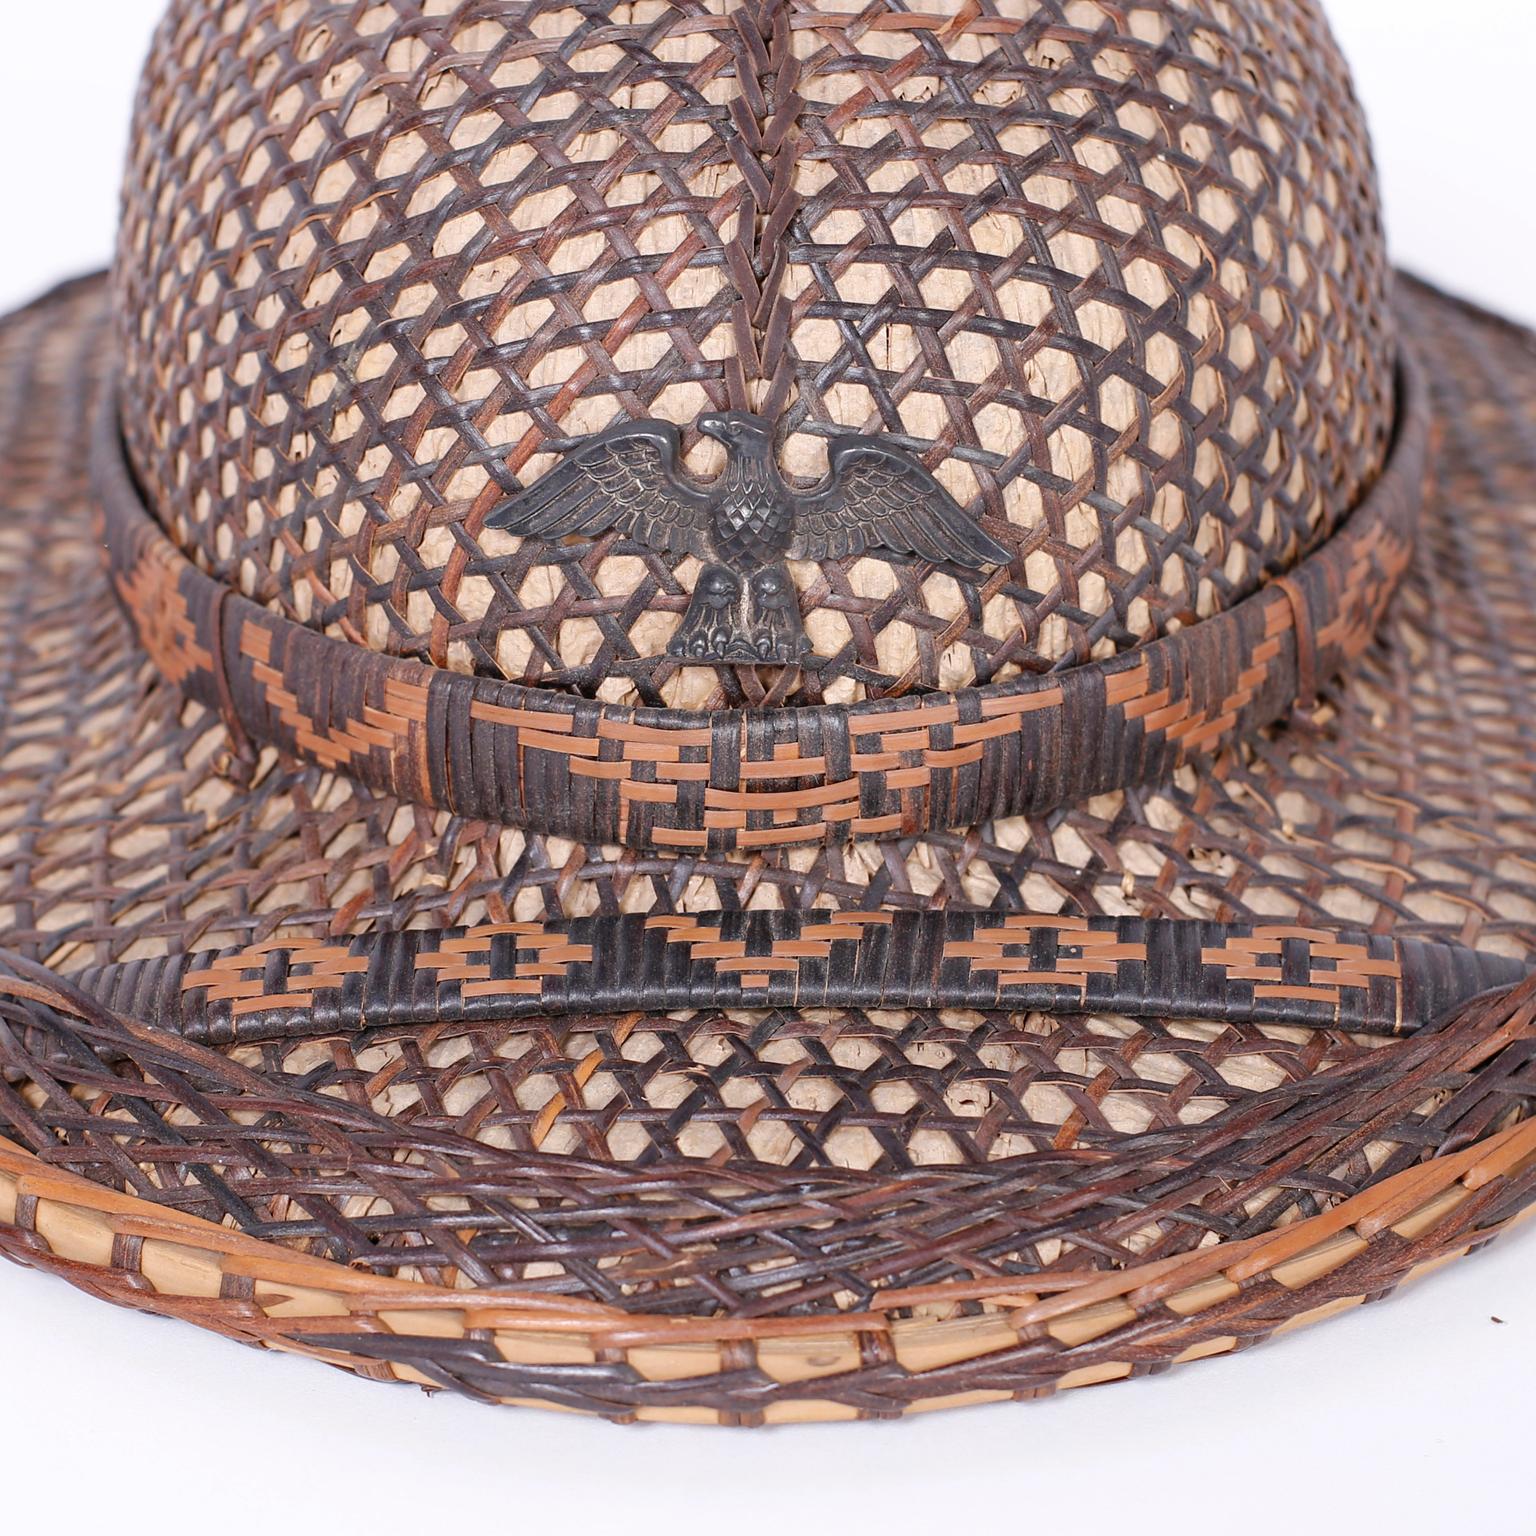 Rare and unusual vintage Anglo-Indian pith helmet with decorative appeal crafted in rattan and wicker with woven geometric symbols and a carved wood eagle on the front. 



 